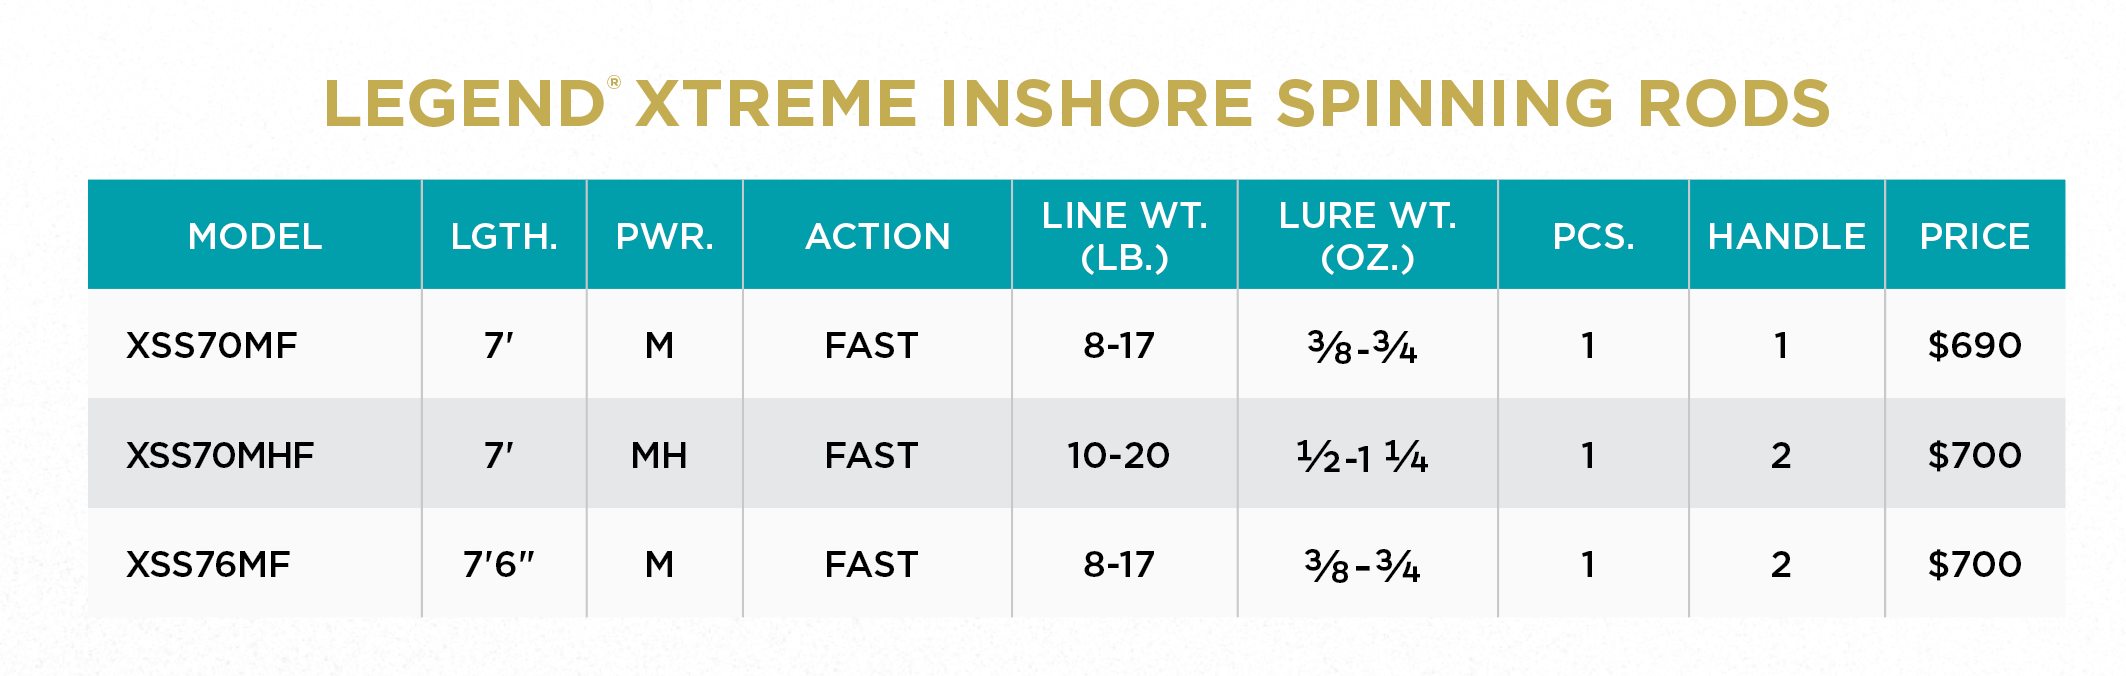 St. Croix Legend Xtreme Inshore Spinning